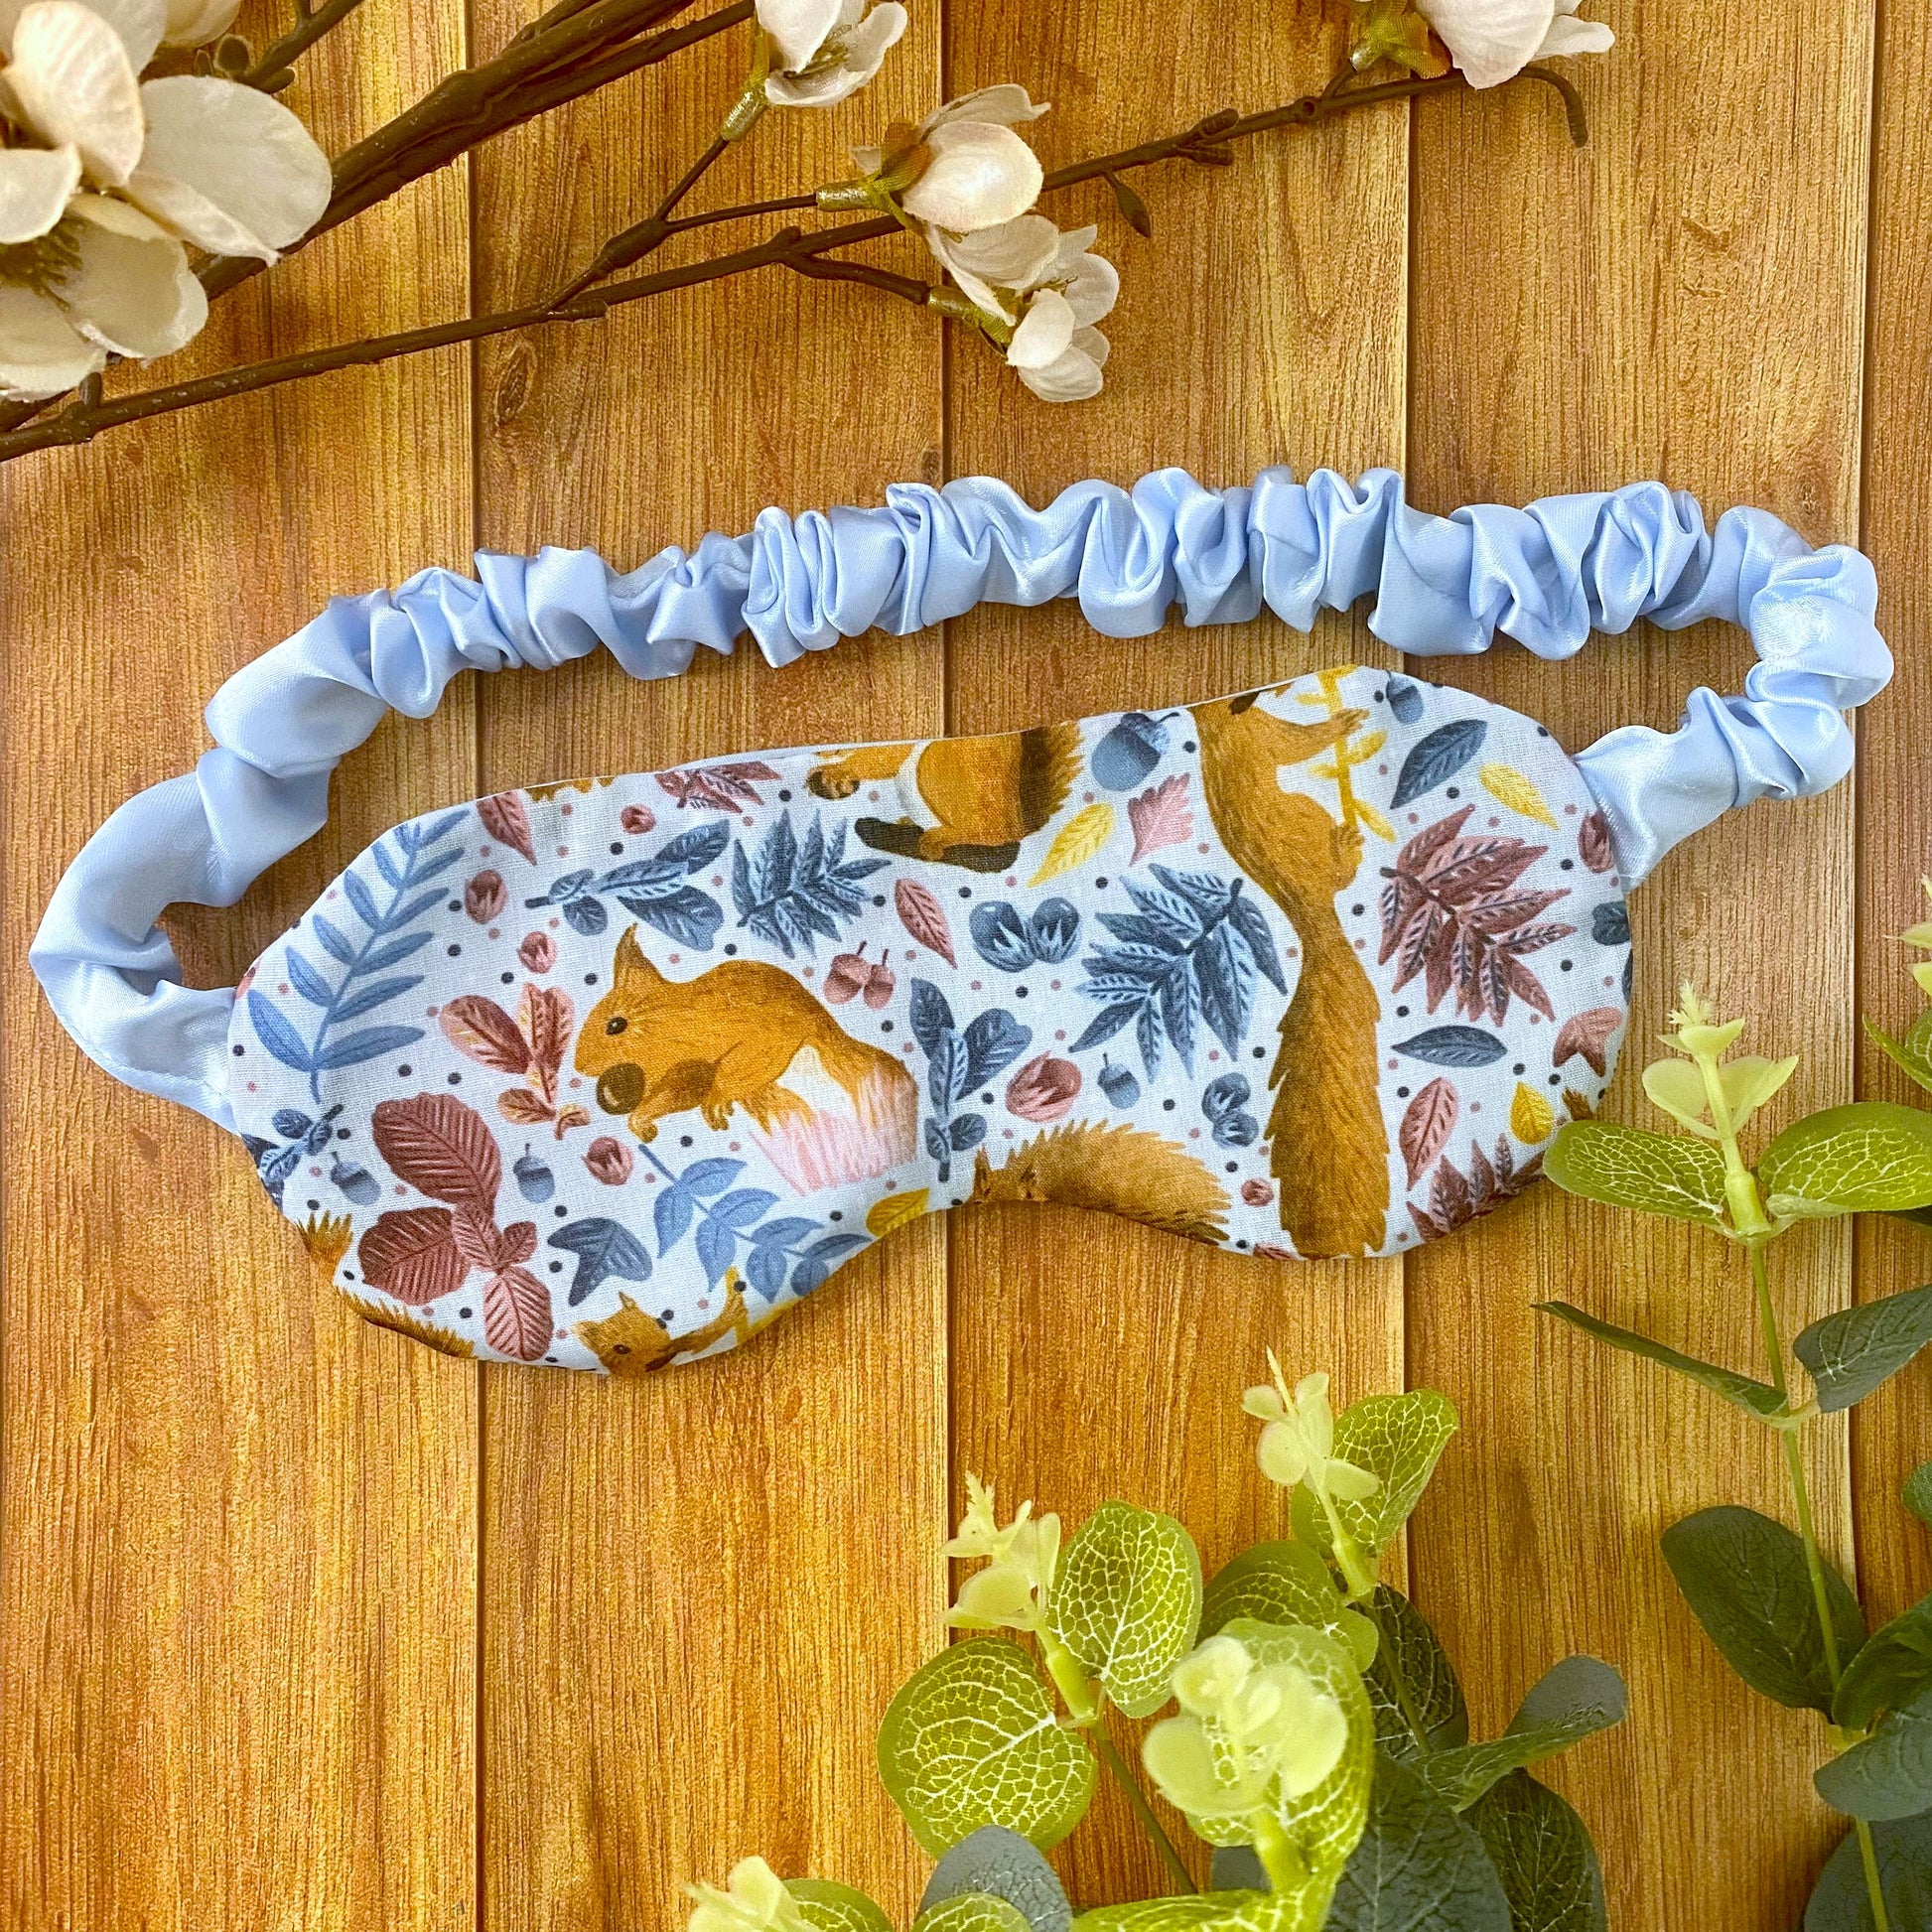 red squirrel patterned sleepmask on wooden backdrop with foliage around it